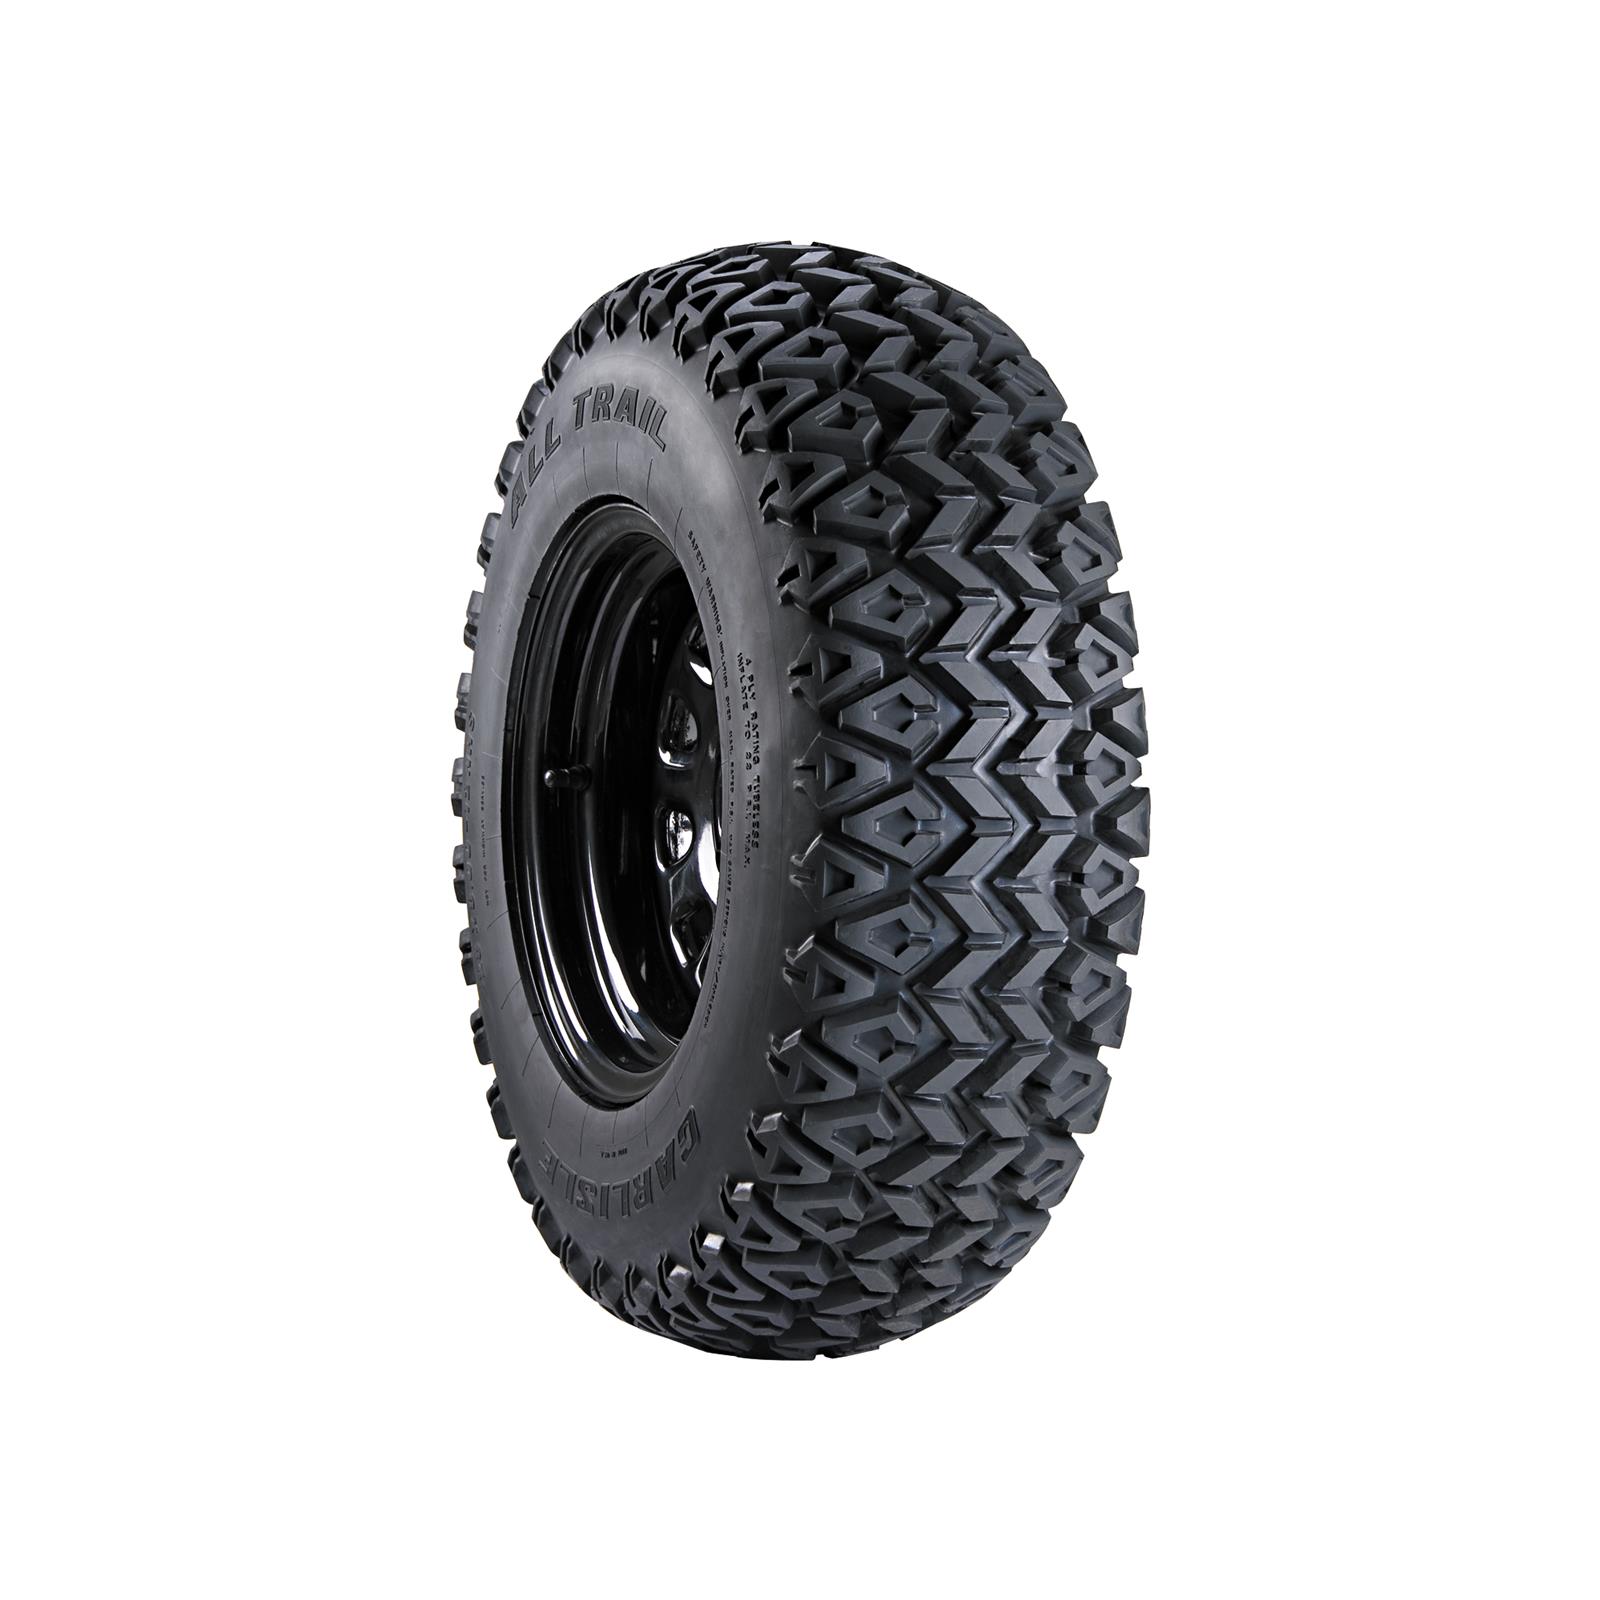 All Trail 4 Ply Bias Front Tire 25 x 8-12 - Click Image to Close